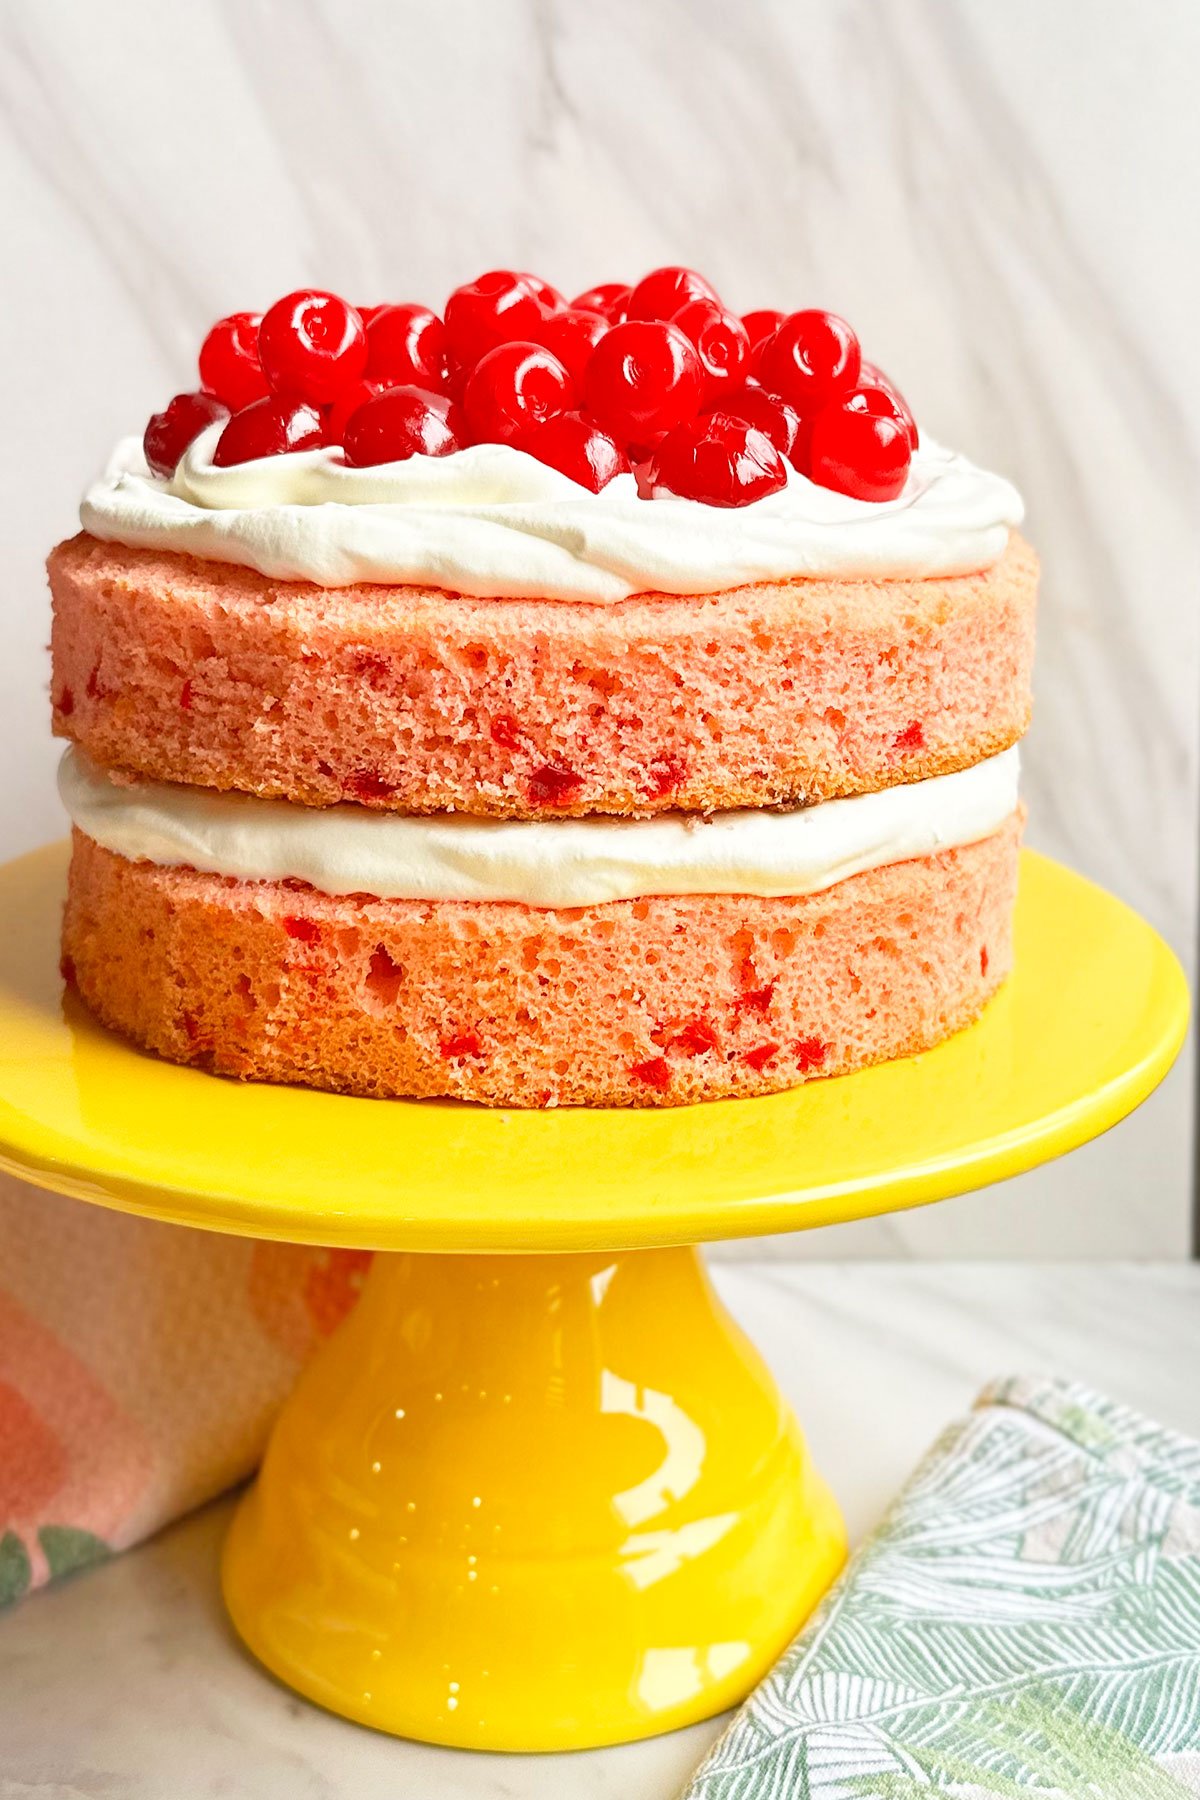 Easy Maraschino Cherry Cake With Cake Mix on Yellow Cake Stand And Marble Background